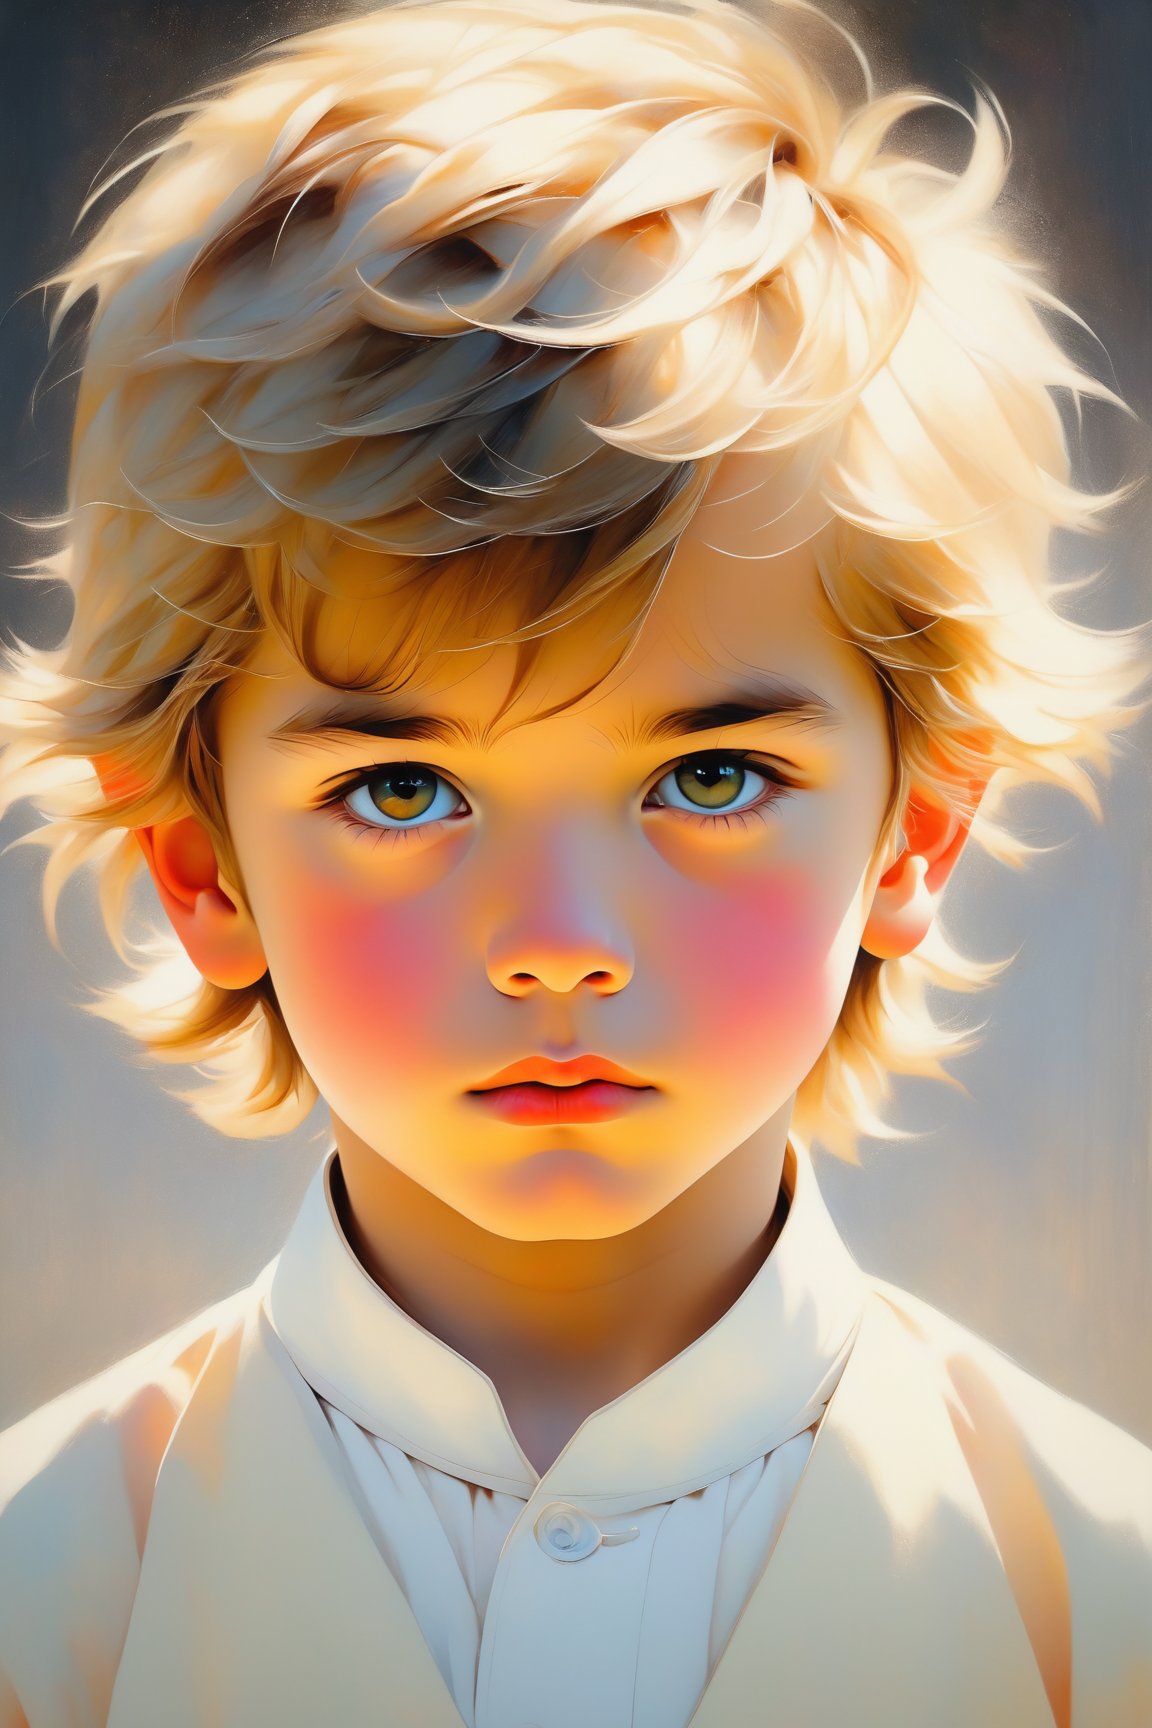 (best quality,ultra-detailed,realistic:1.37),(minimalism style, Scandinavian) portrait of a (1boy) with tousled (Alabaster) hair wearing an (Ascot cap). The focus of the artwork is on the boy's (lip) which is delicately painted in vibrant colors. The background features a subtle fluorescent gradient, adding a touch of modernity to the piece. The overall composition is clean and simple, adhering to the principles of minimalism. The use of (niji style) enhances the artistic quality of the portrait, creating a sense of depth and dimension. The boy's facial features are beautifully rendered to showcase his youthful innocence and captivating gaze. The artwork is a (masterpiece) of high resolution, capturing every fine detail with precision.